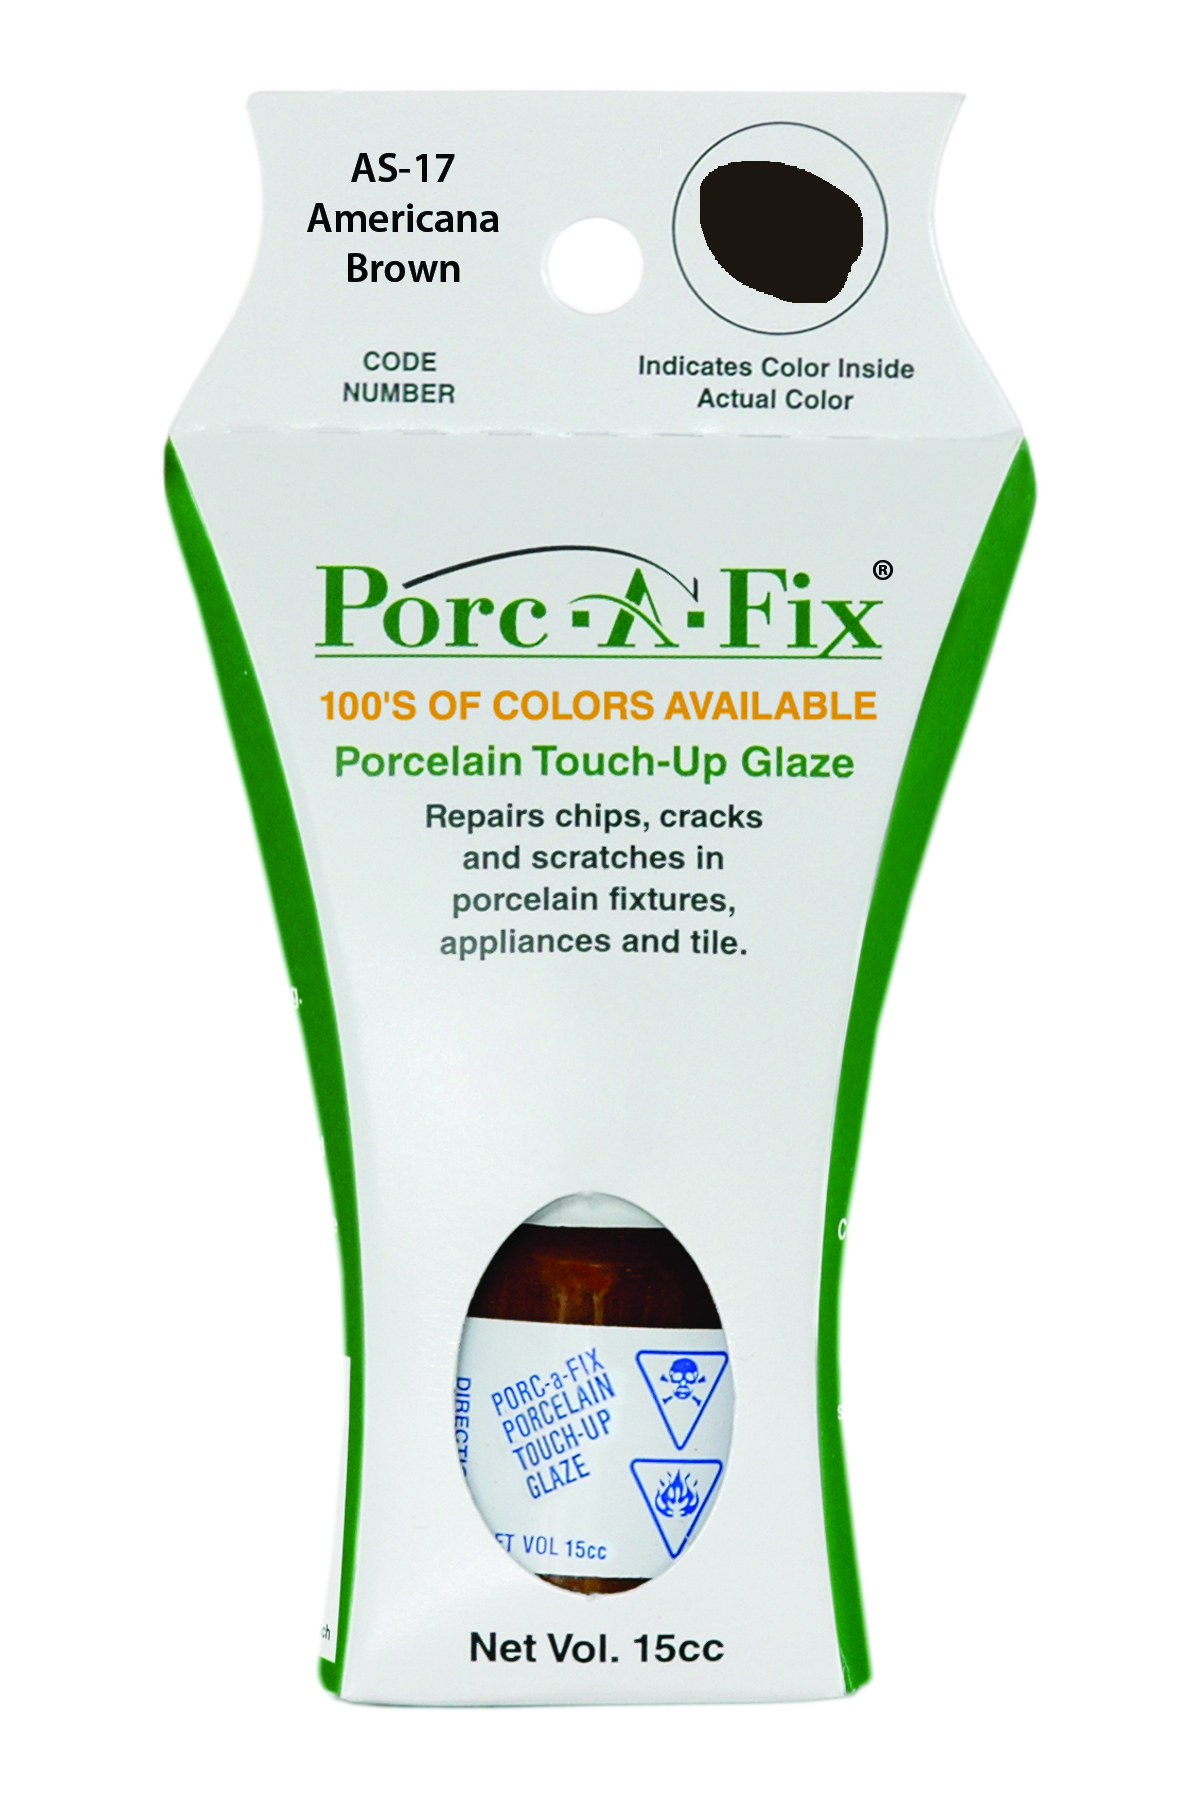 Fixture-Fix | AS-17 | Porc-A-Fix Touch-Up Glaze American Standard Americana Brown - Compatible with American Standard 070900-1420A Touch Up Paint Kit - AMERICANA BROWN